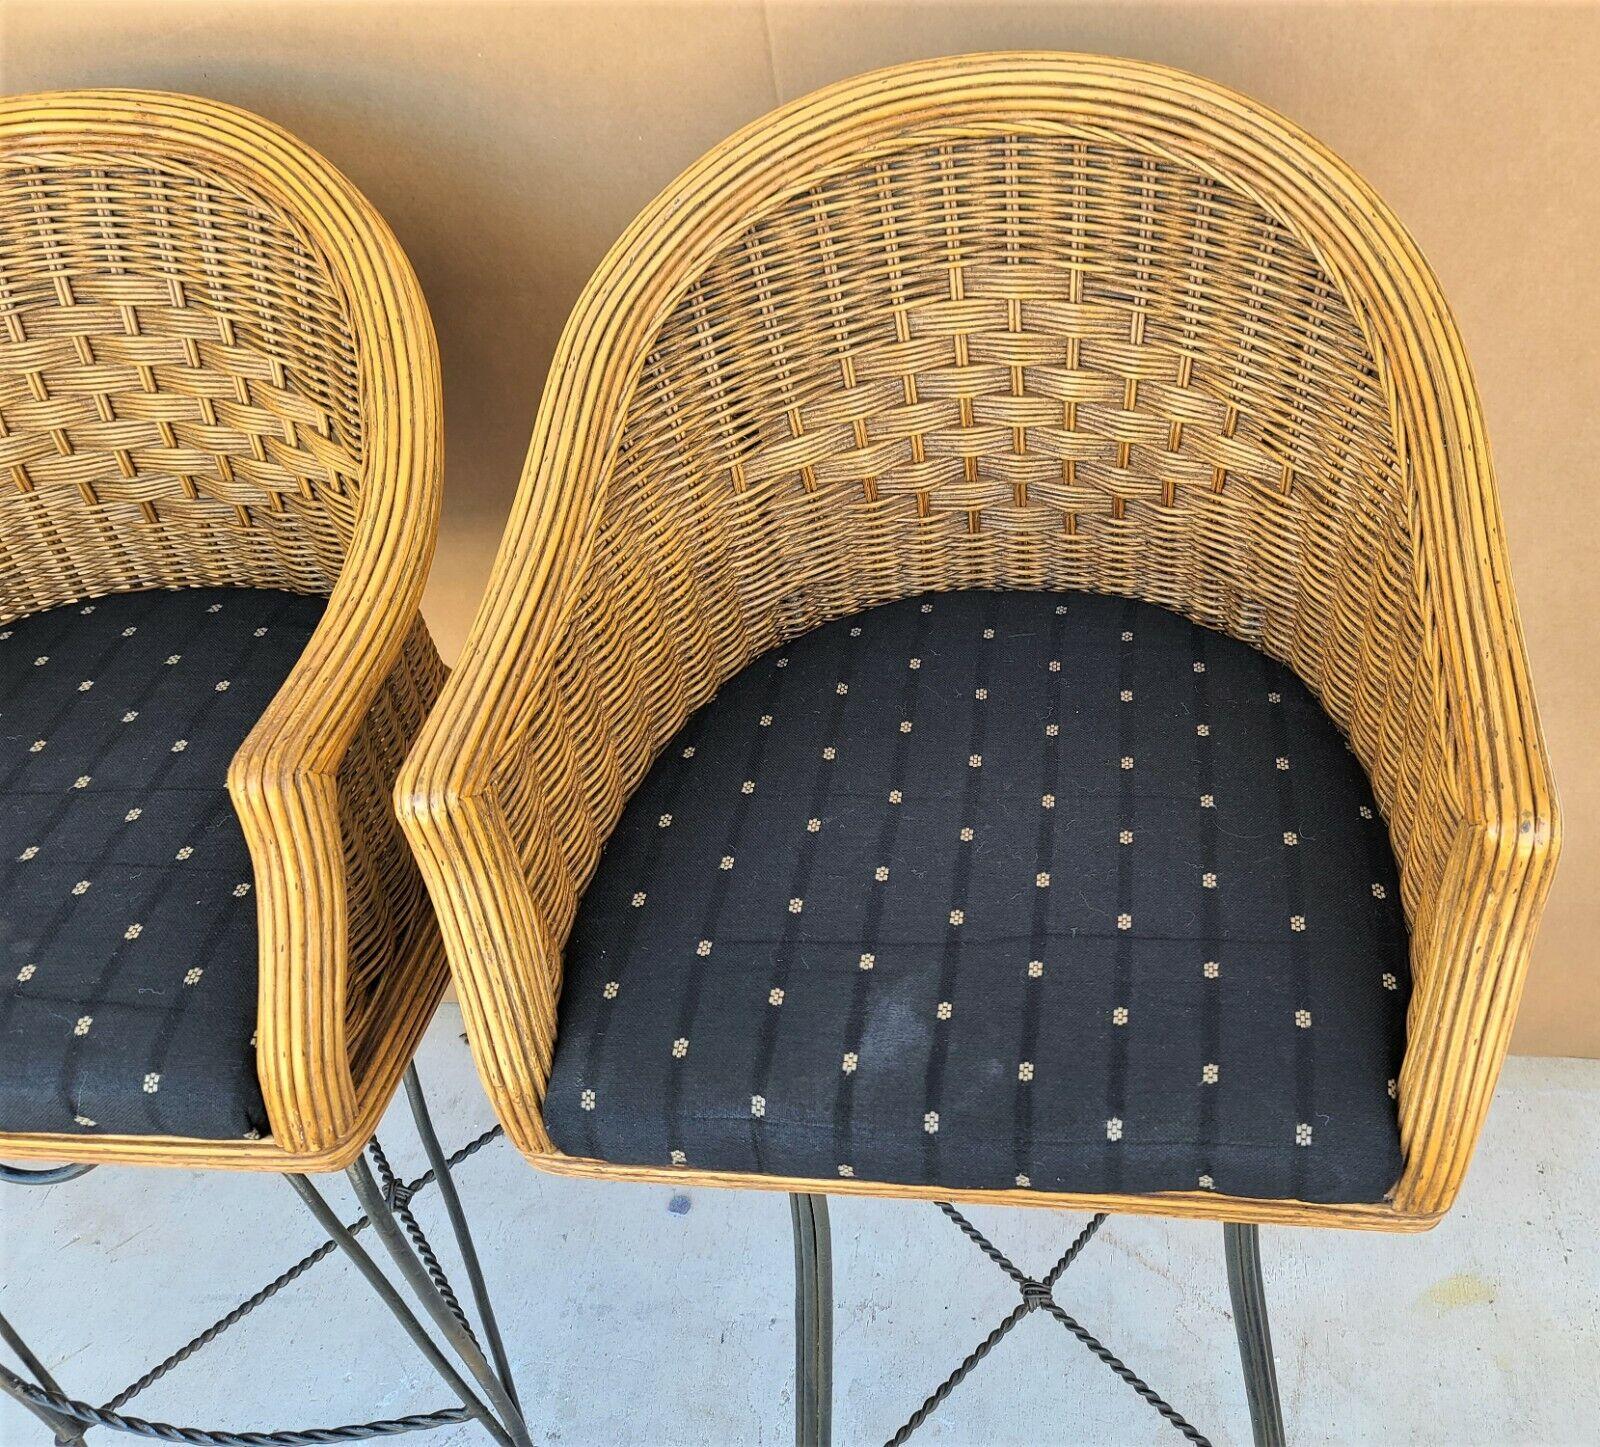 Late 20th Century Wicker Bamboo Swivel Barstools - a Pair For Sale